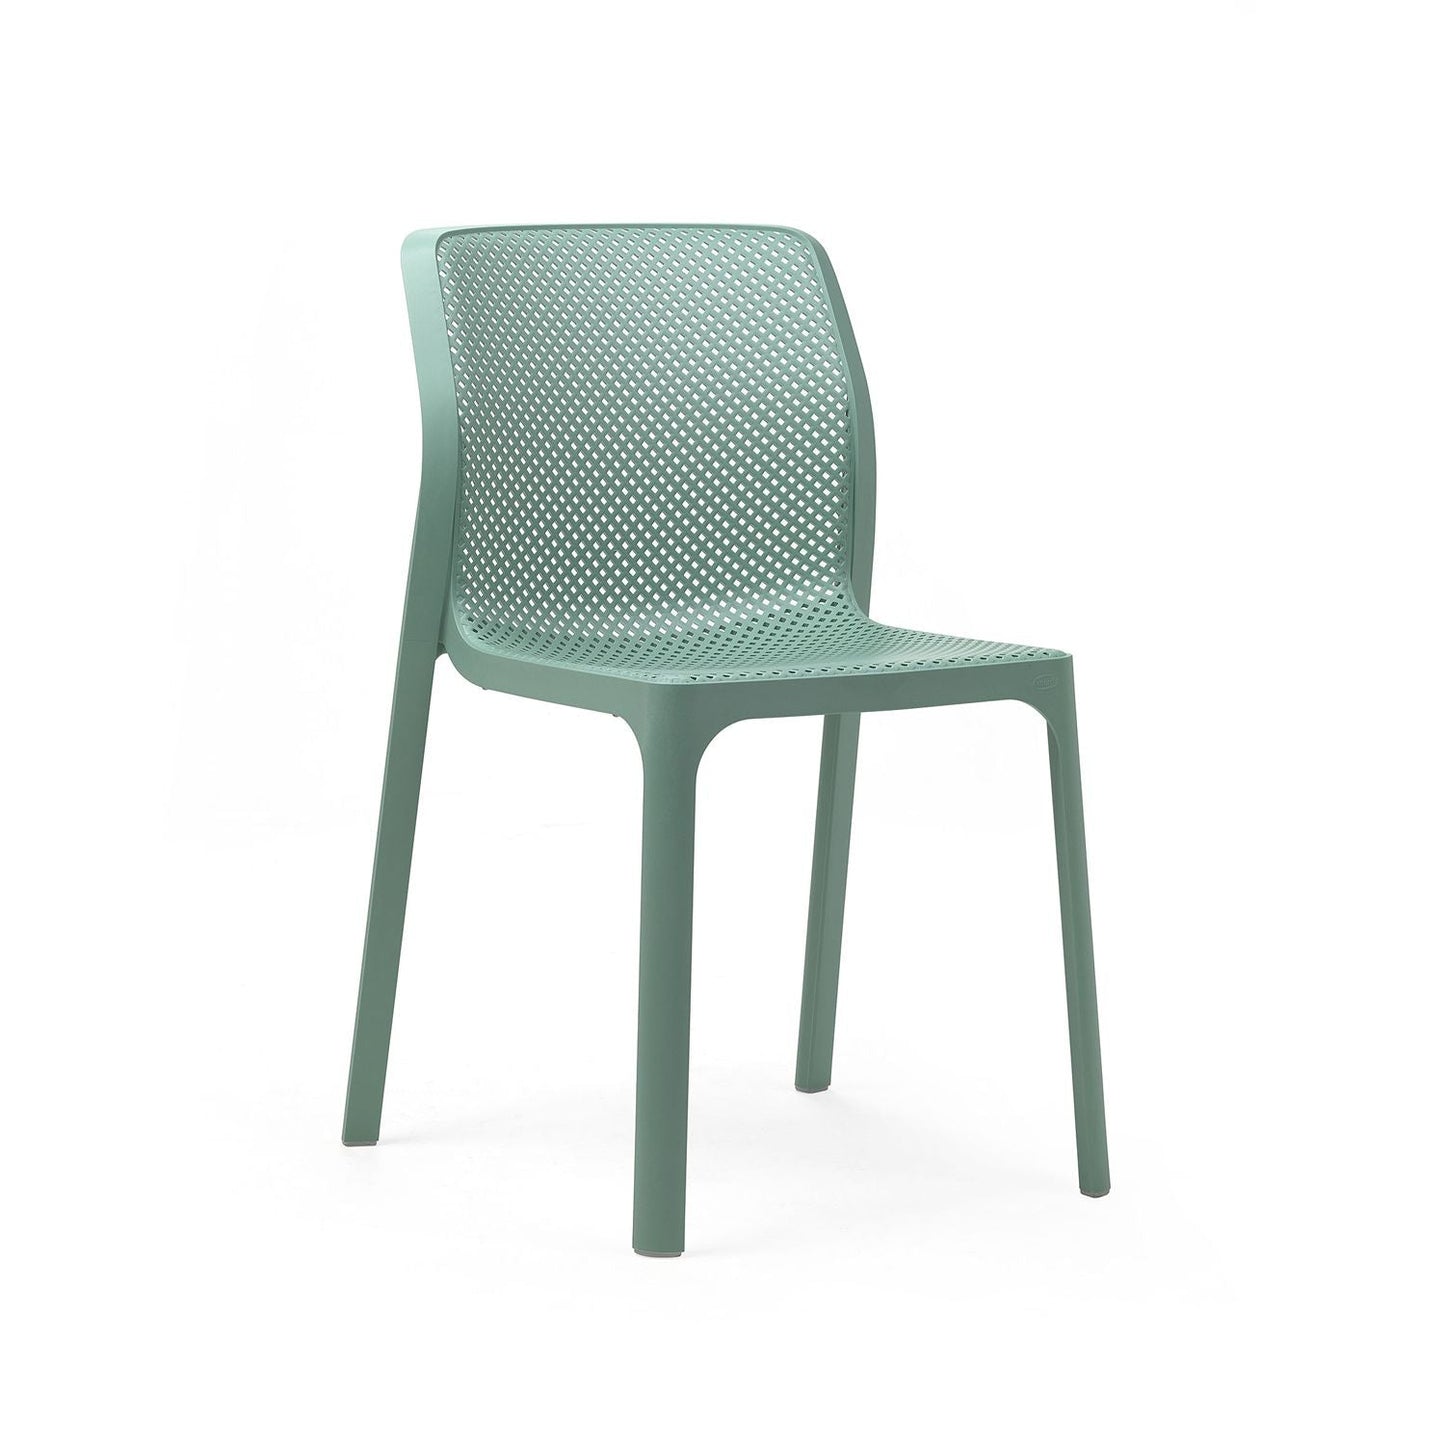 Bit Chair By Nardi - Turquoise